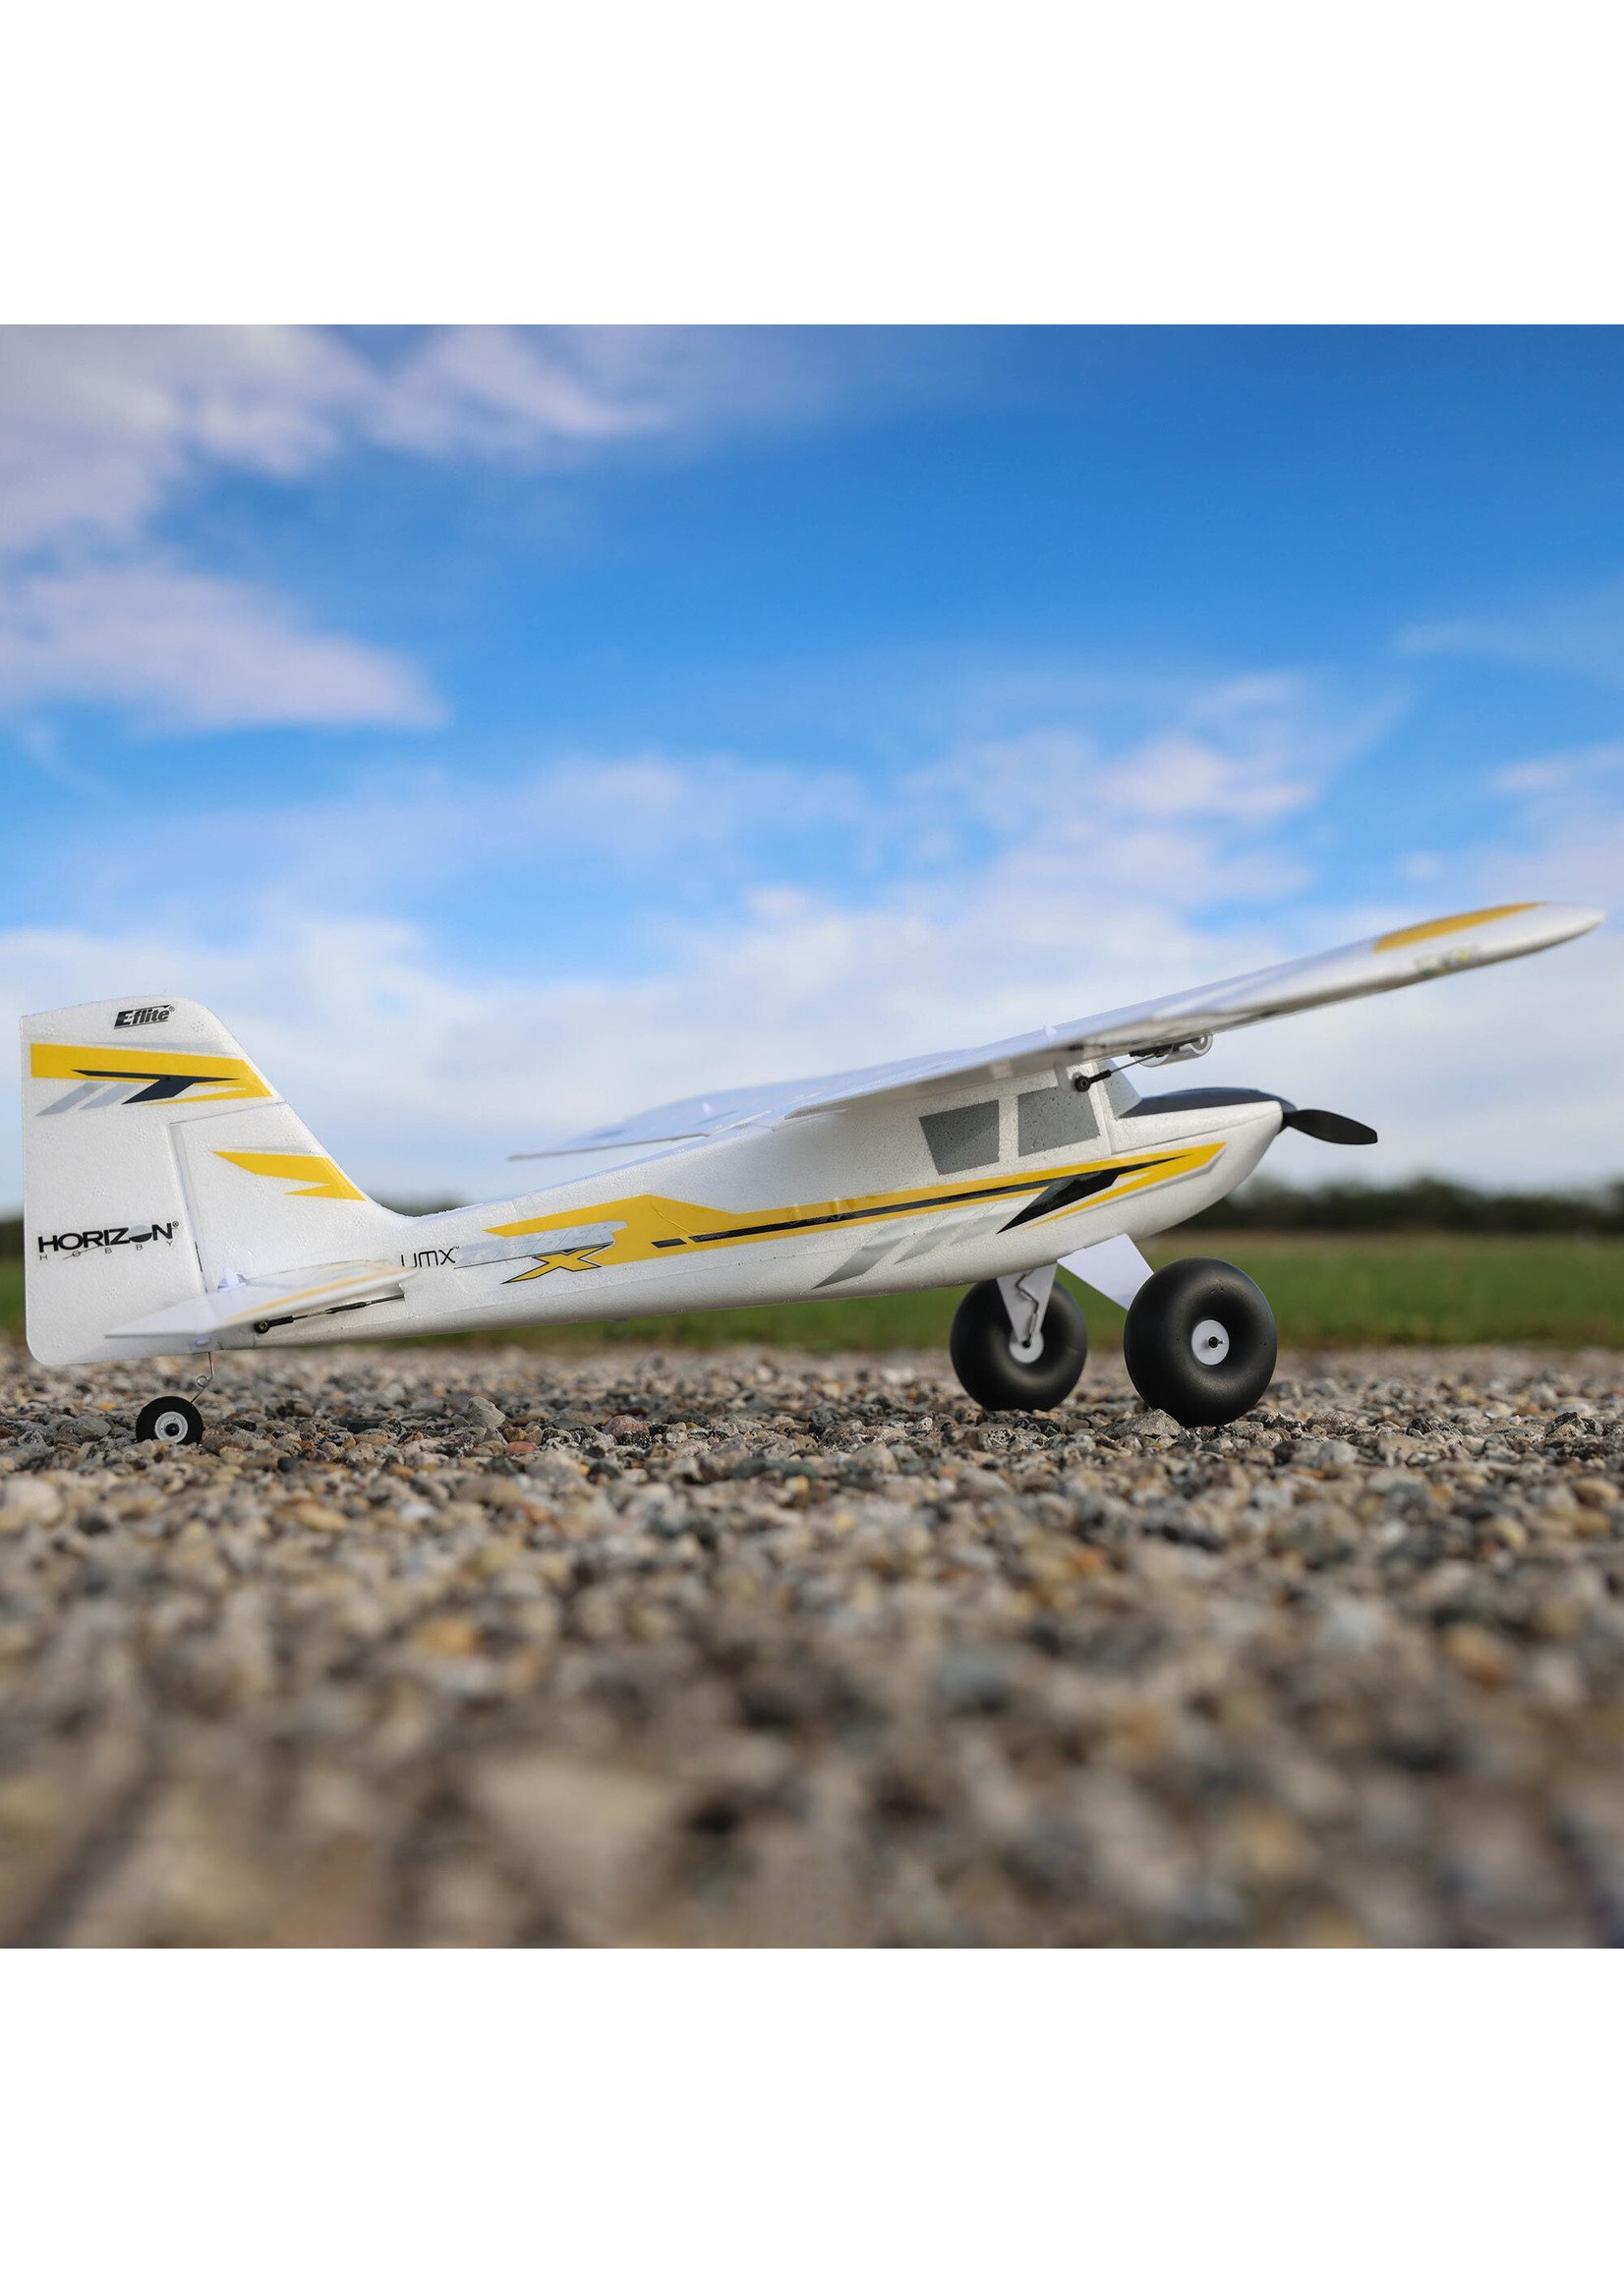 E-flite UMX Timber X BNF Basic with AS3X and SAFE Select - 570mm